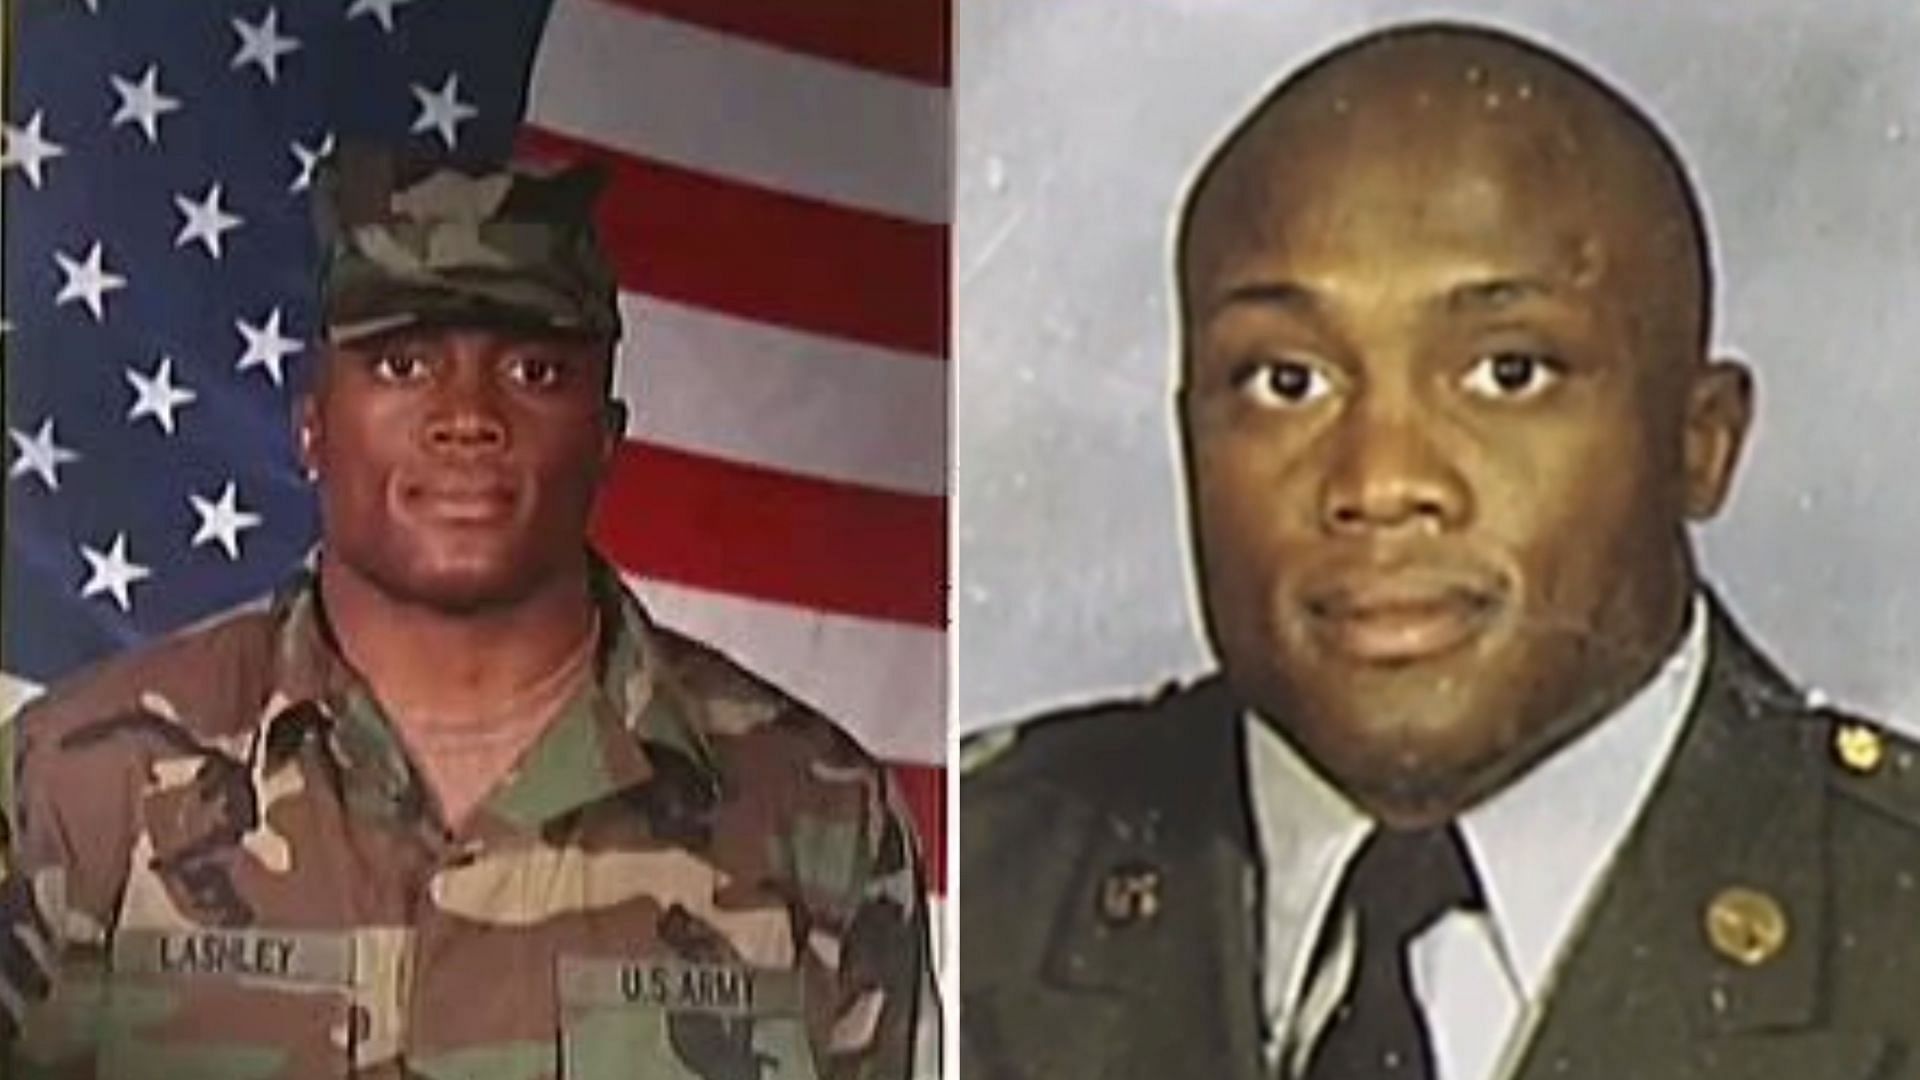 Bobby Lashley enlisted in the U.S. Army after college